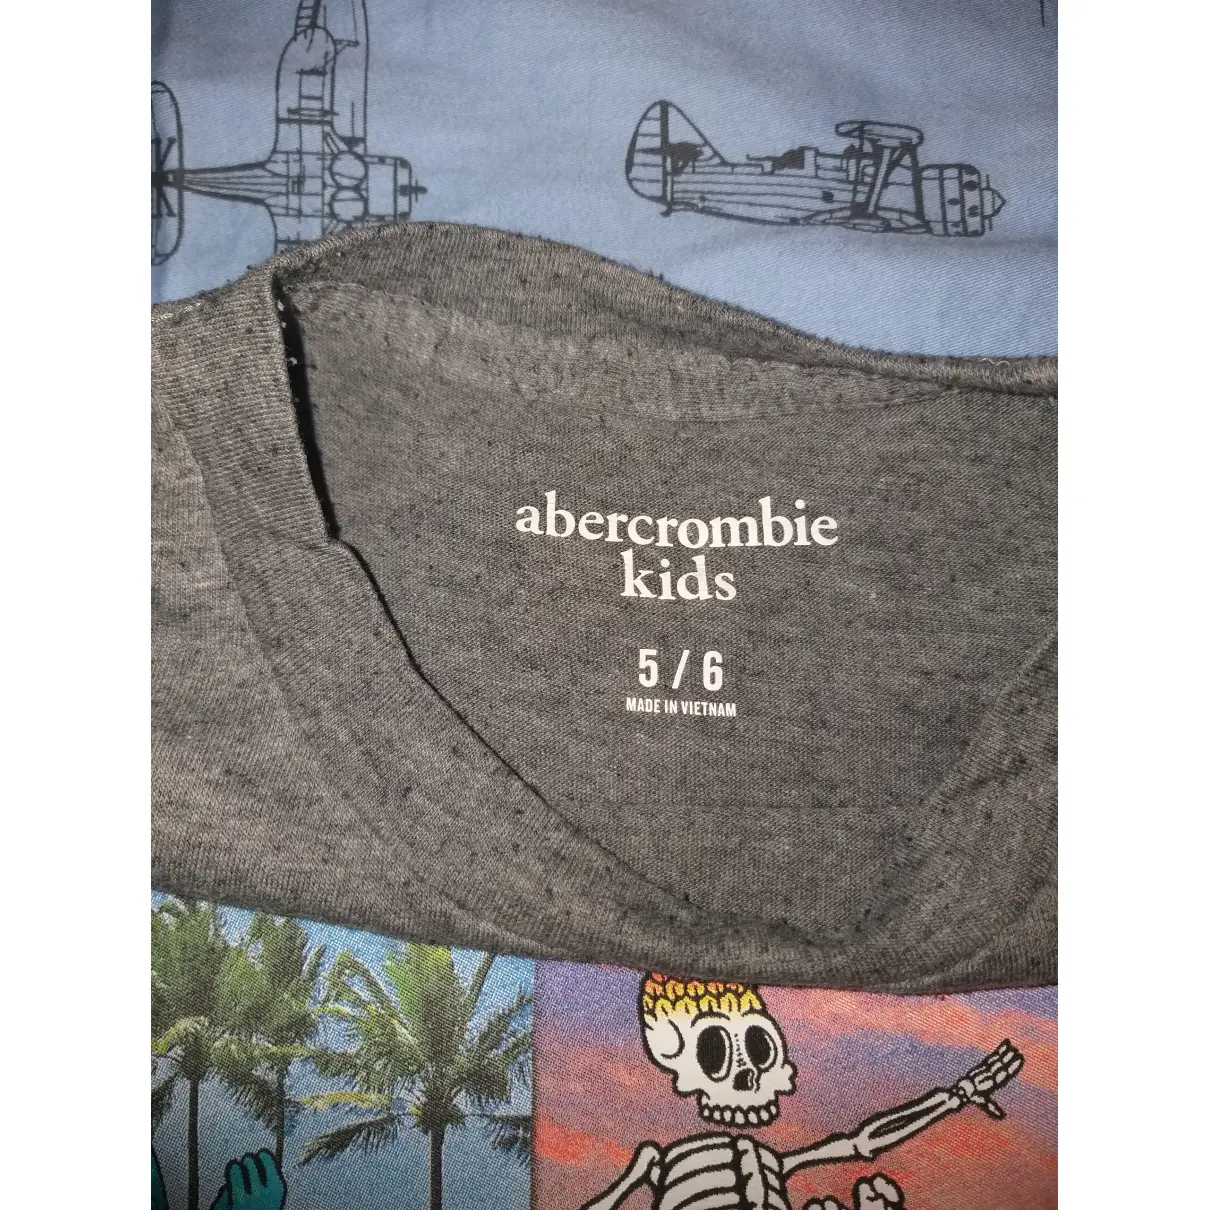 Buy Abercrombie & Fitch T-shirt online